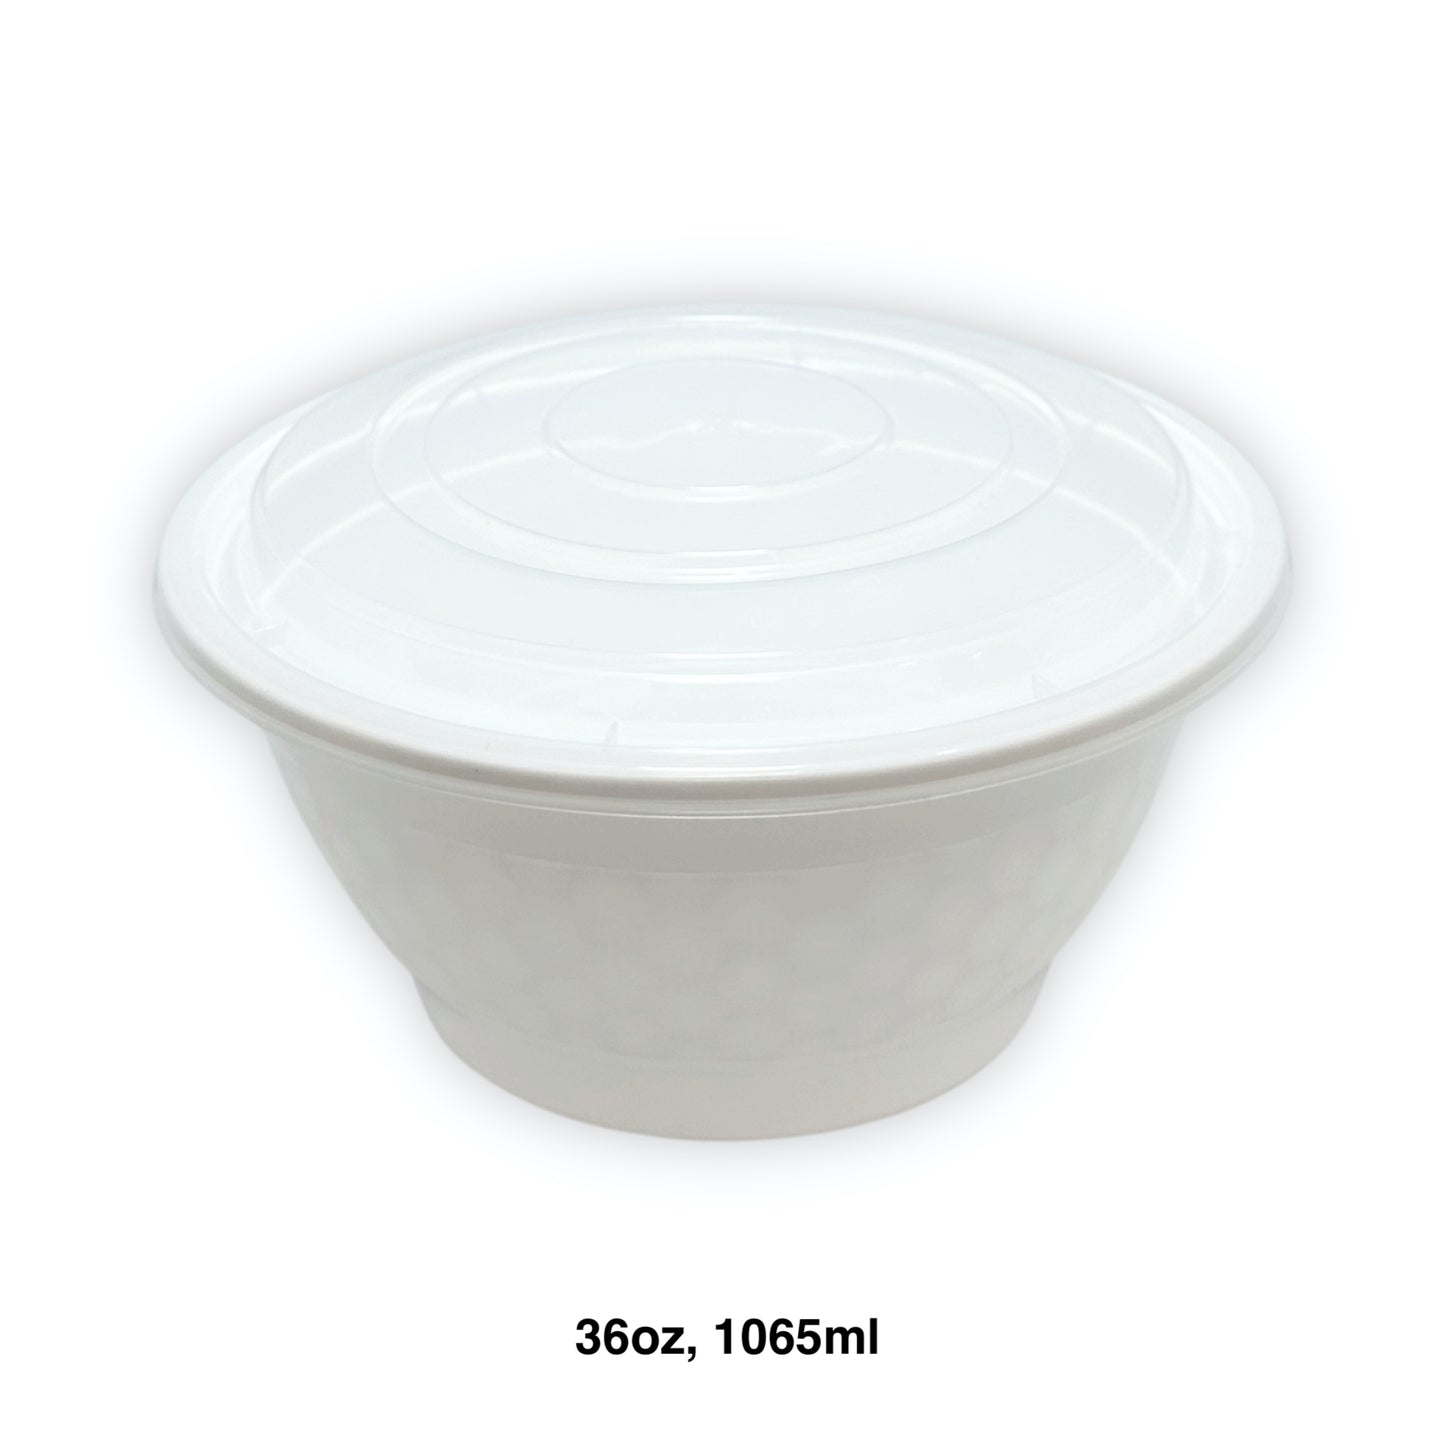 KIS-BO36G | 150sets 36oz, 1065ml White PP Round Bowl with Clear Lids Combo; $0.258/set